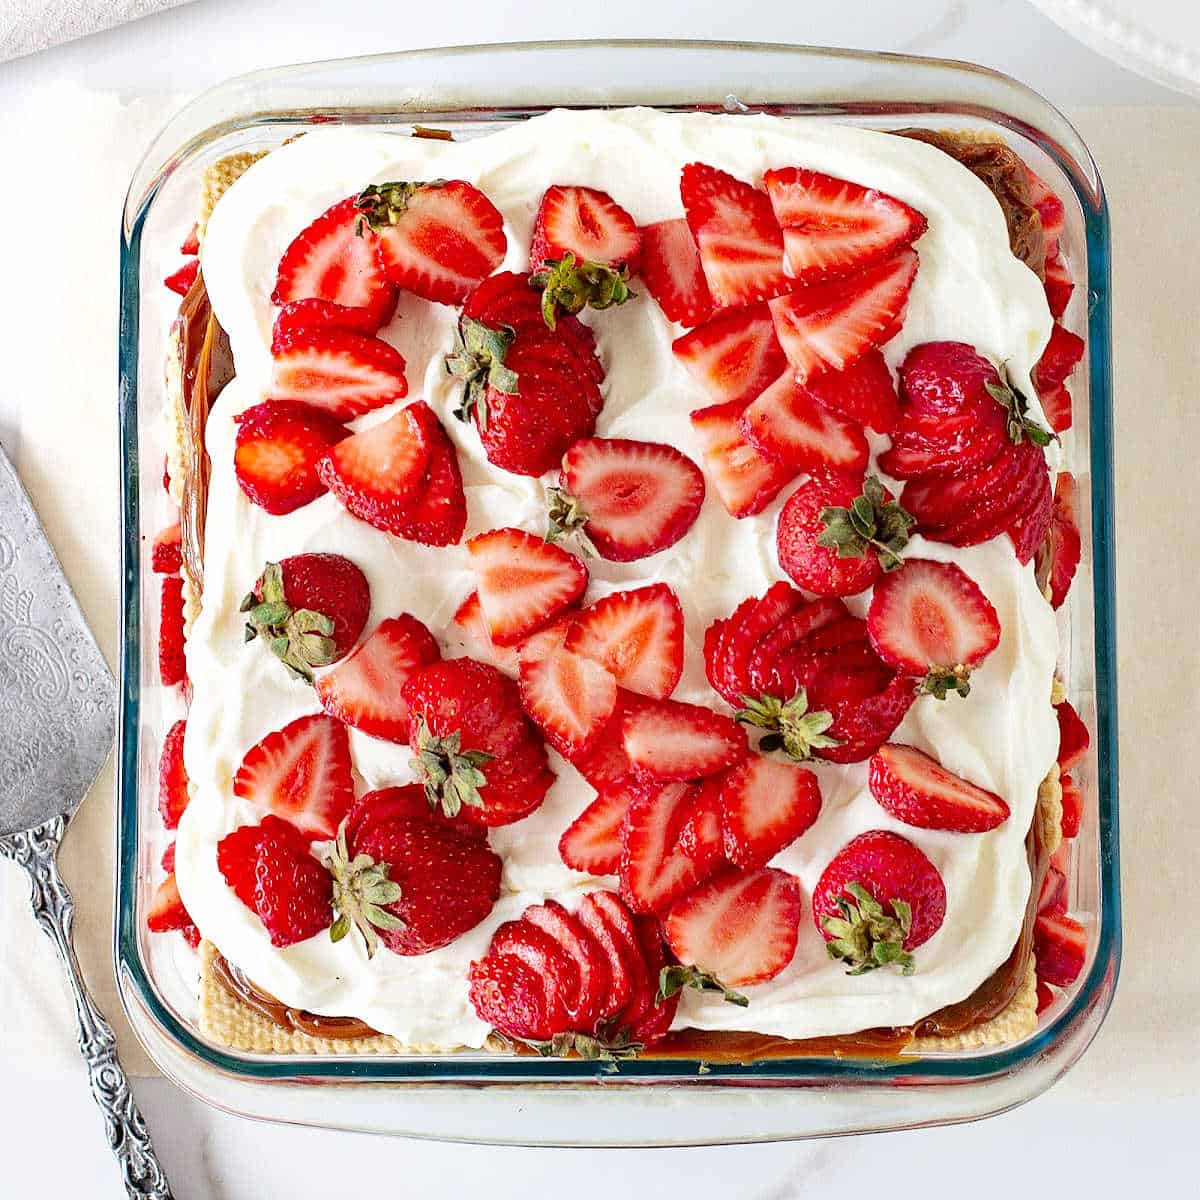 Glass square dish with strawberries and cream dessert; a silver cake server on the side.